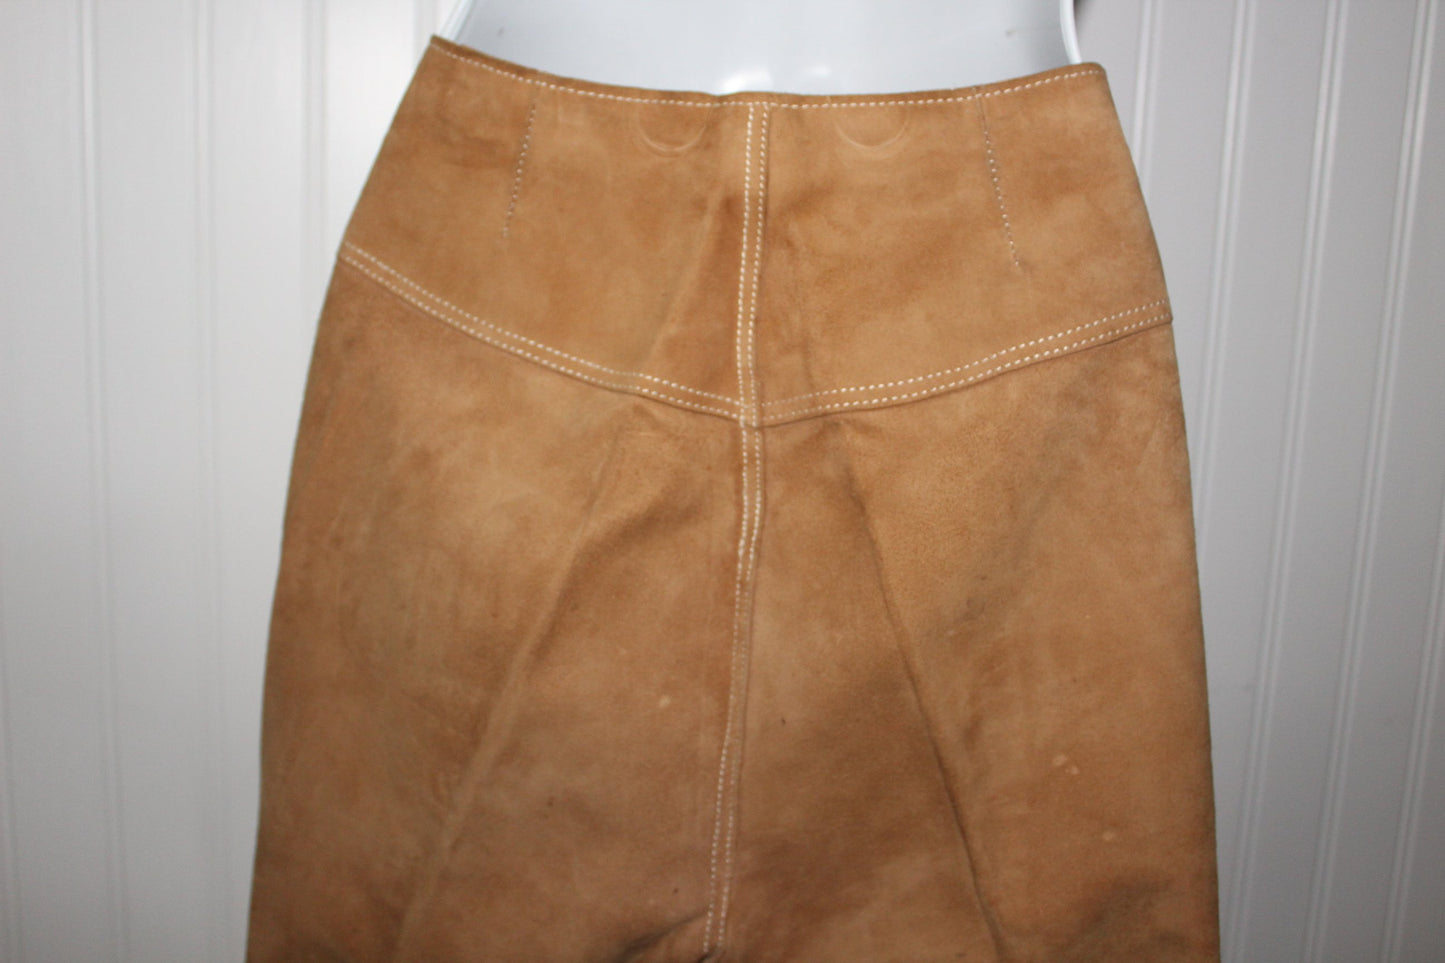 Vintage Leather Pants Laced Flare Leg Caramel Cream Top Stitch Great Detail snap waist